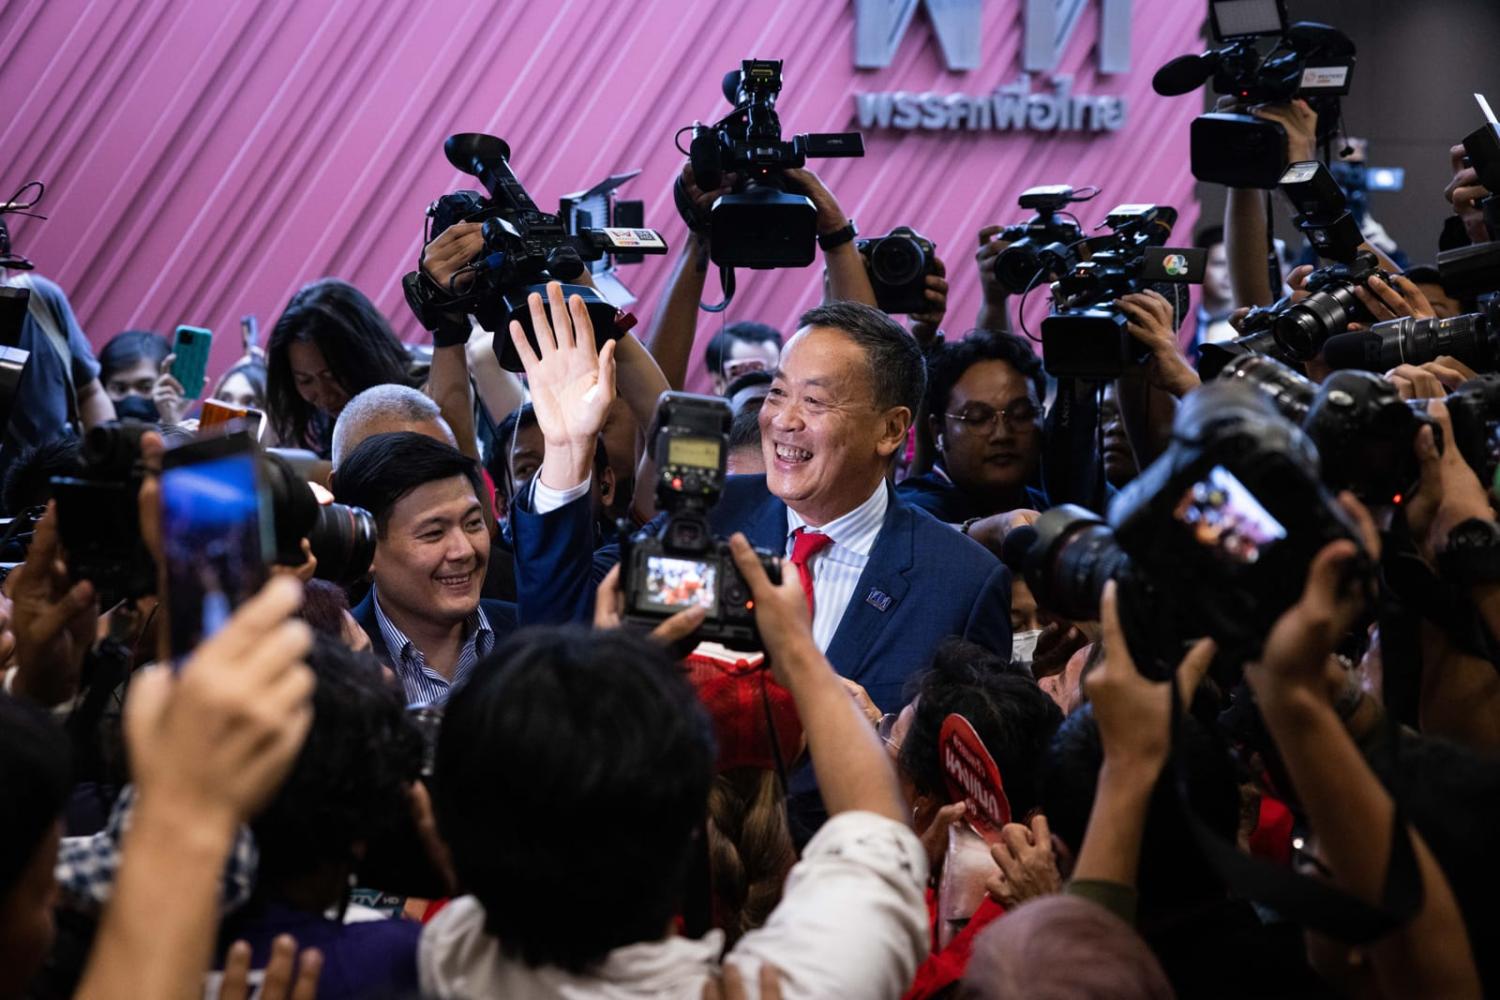 Srettha Thavisin, Thailand's Prime Minister, after securing the job in August after three months of post-election deadlock (Lauren DeCicca/Getty Images)